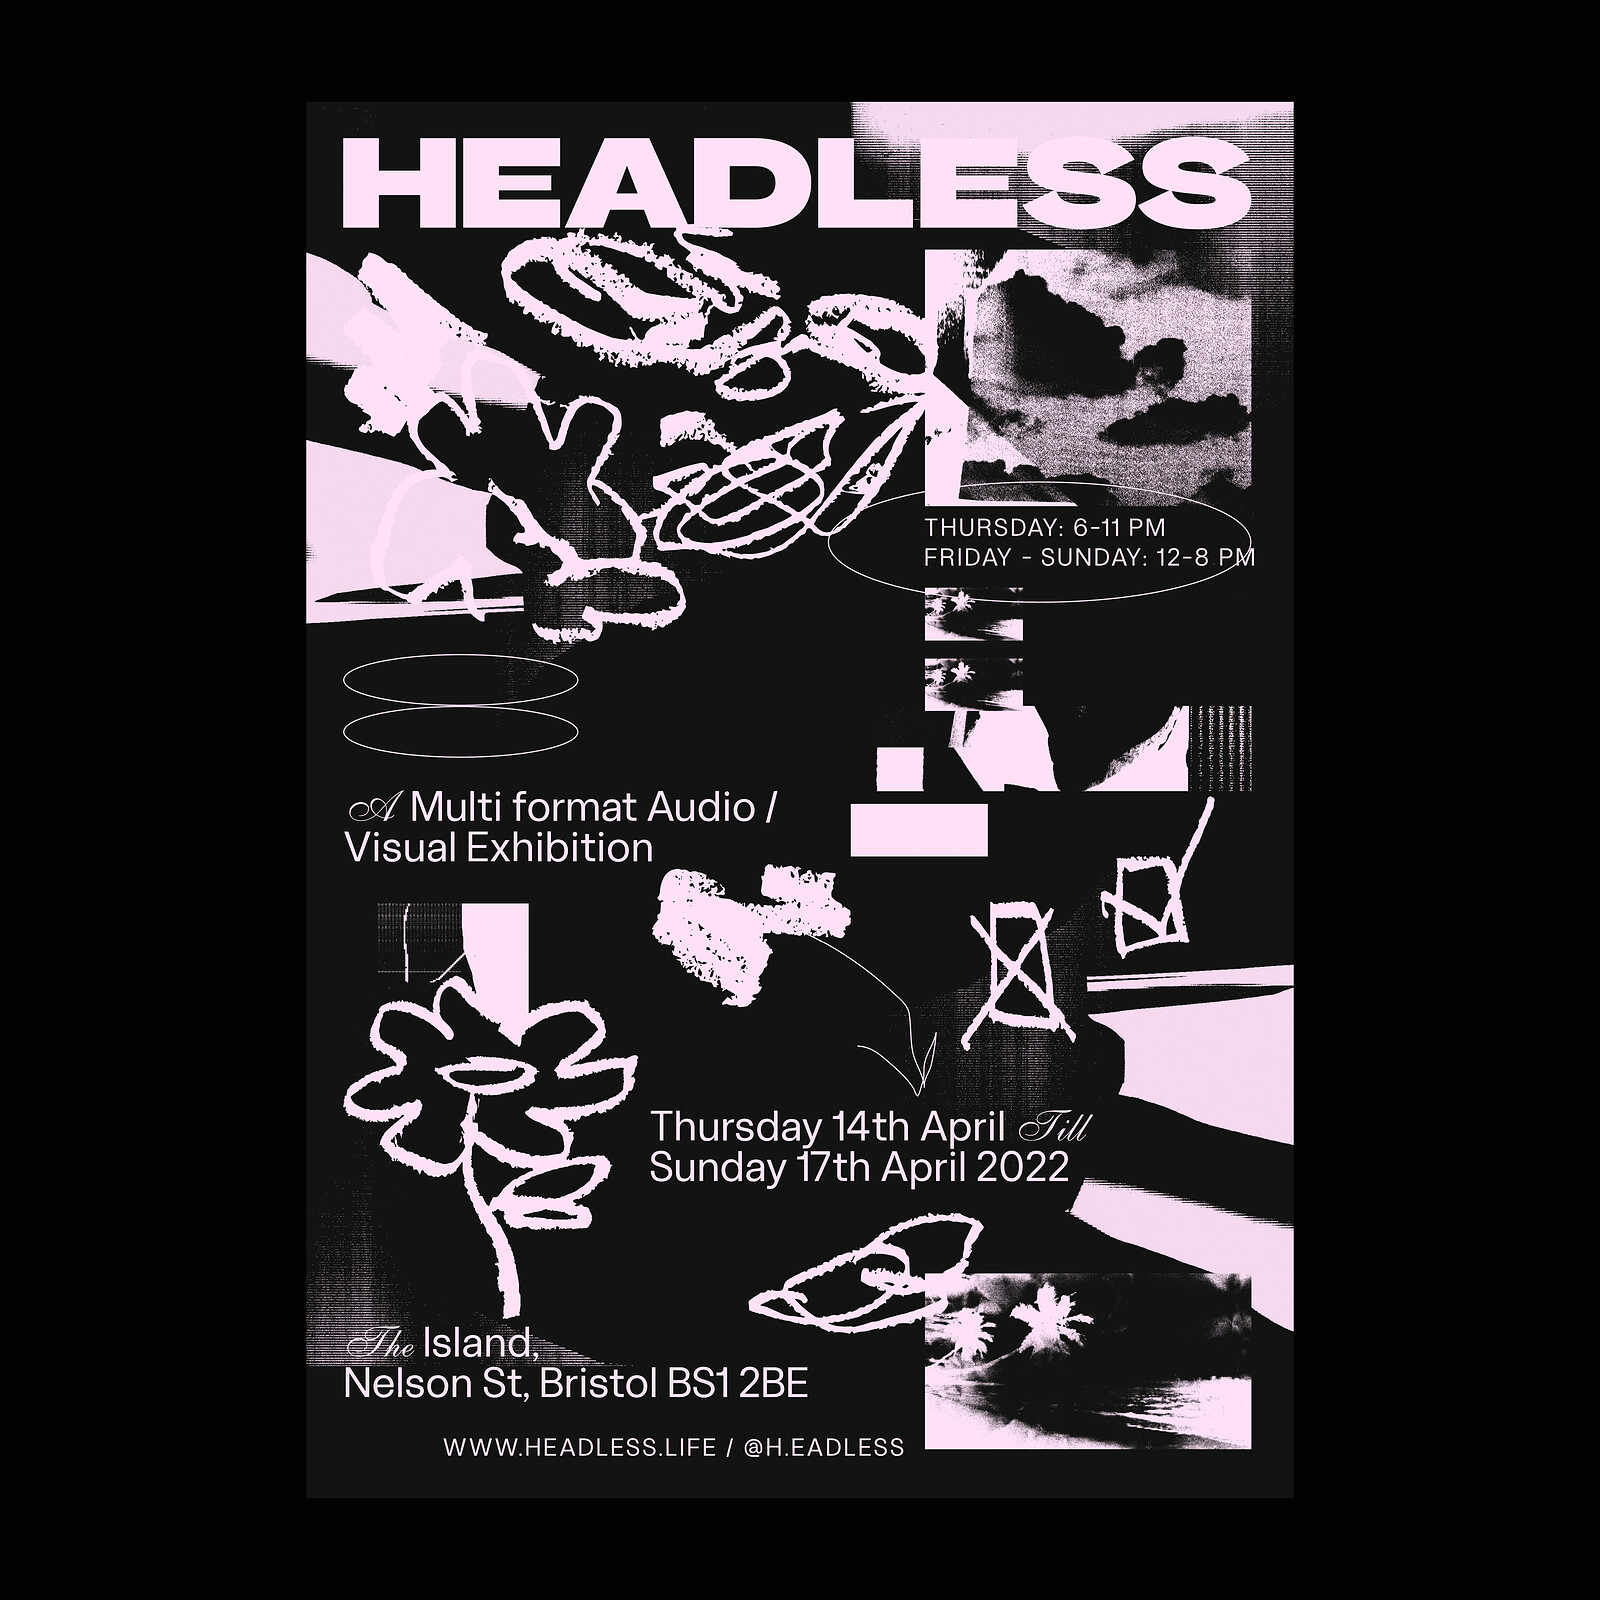 HEADLESS: Body 1, Launch at The Island